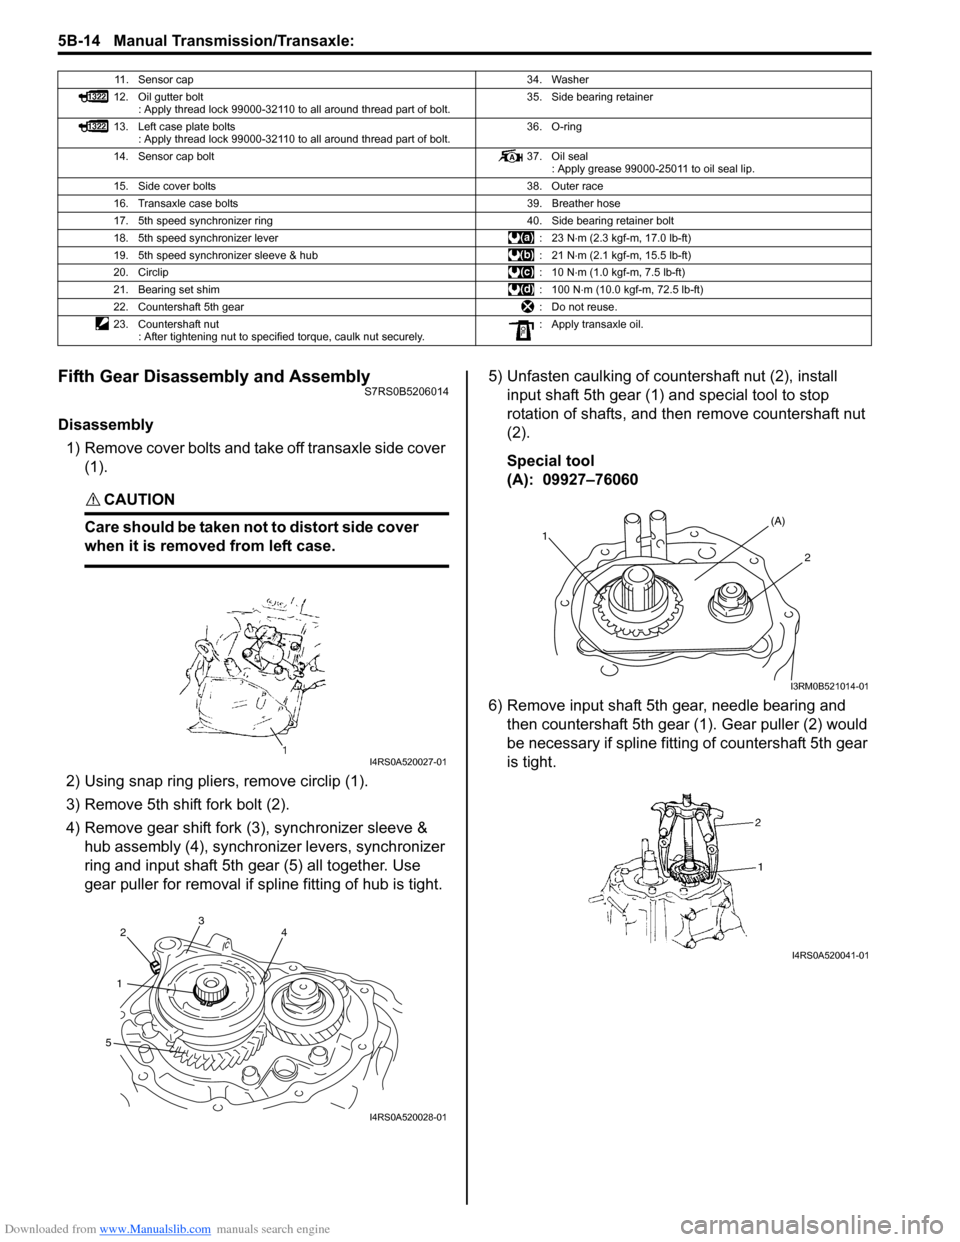 SUZUKI SWIFT 2006 2.G Service Workshop Manual Downloaded from www.Manualslib.com manuals search engine 5B-14 Manual Transmission/Transaxle: 
Fifth Gear Disassembly and AssemblyS7RS0B5206014
Disassembly1) Remove cover bolts and take off transaxle 